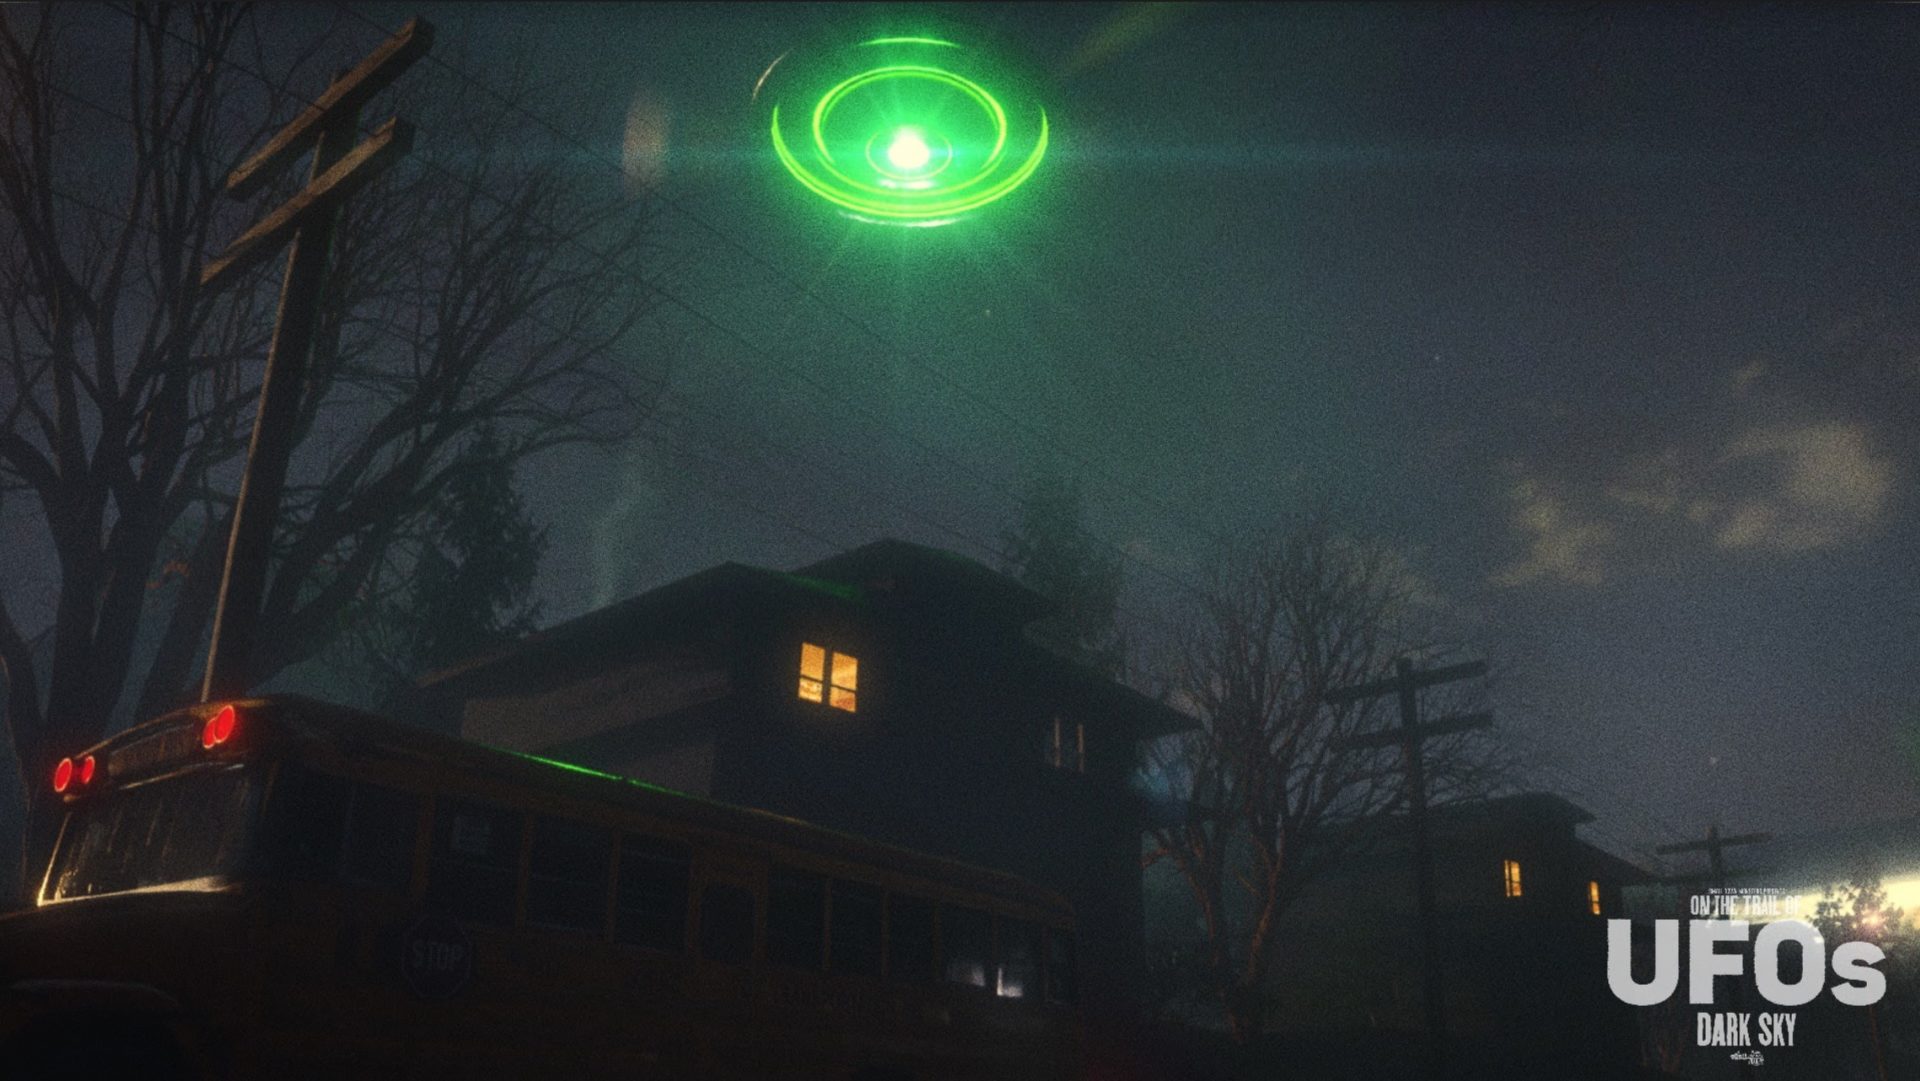 Ordinary: Filmmakers hunt for the reality in unique documentary trailer for ‘On the Plug of UFOs: Darkish Sky’